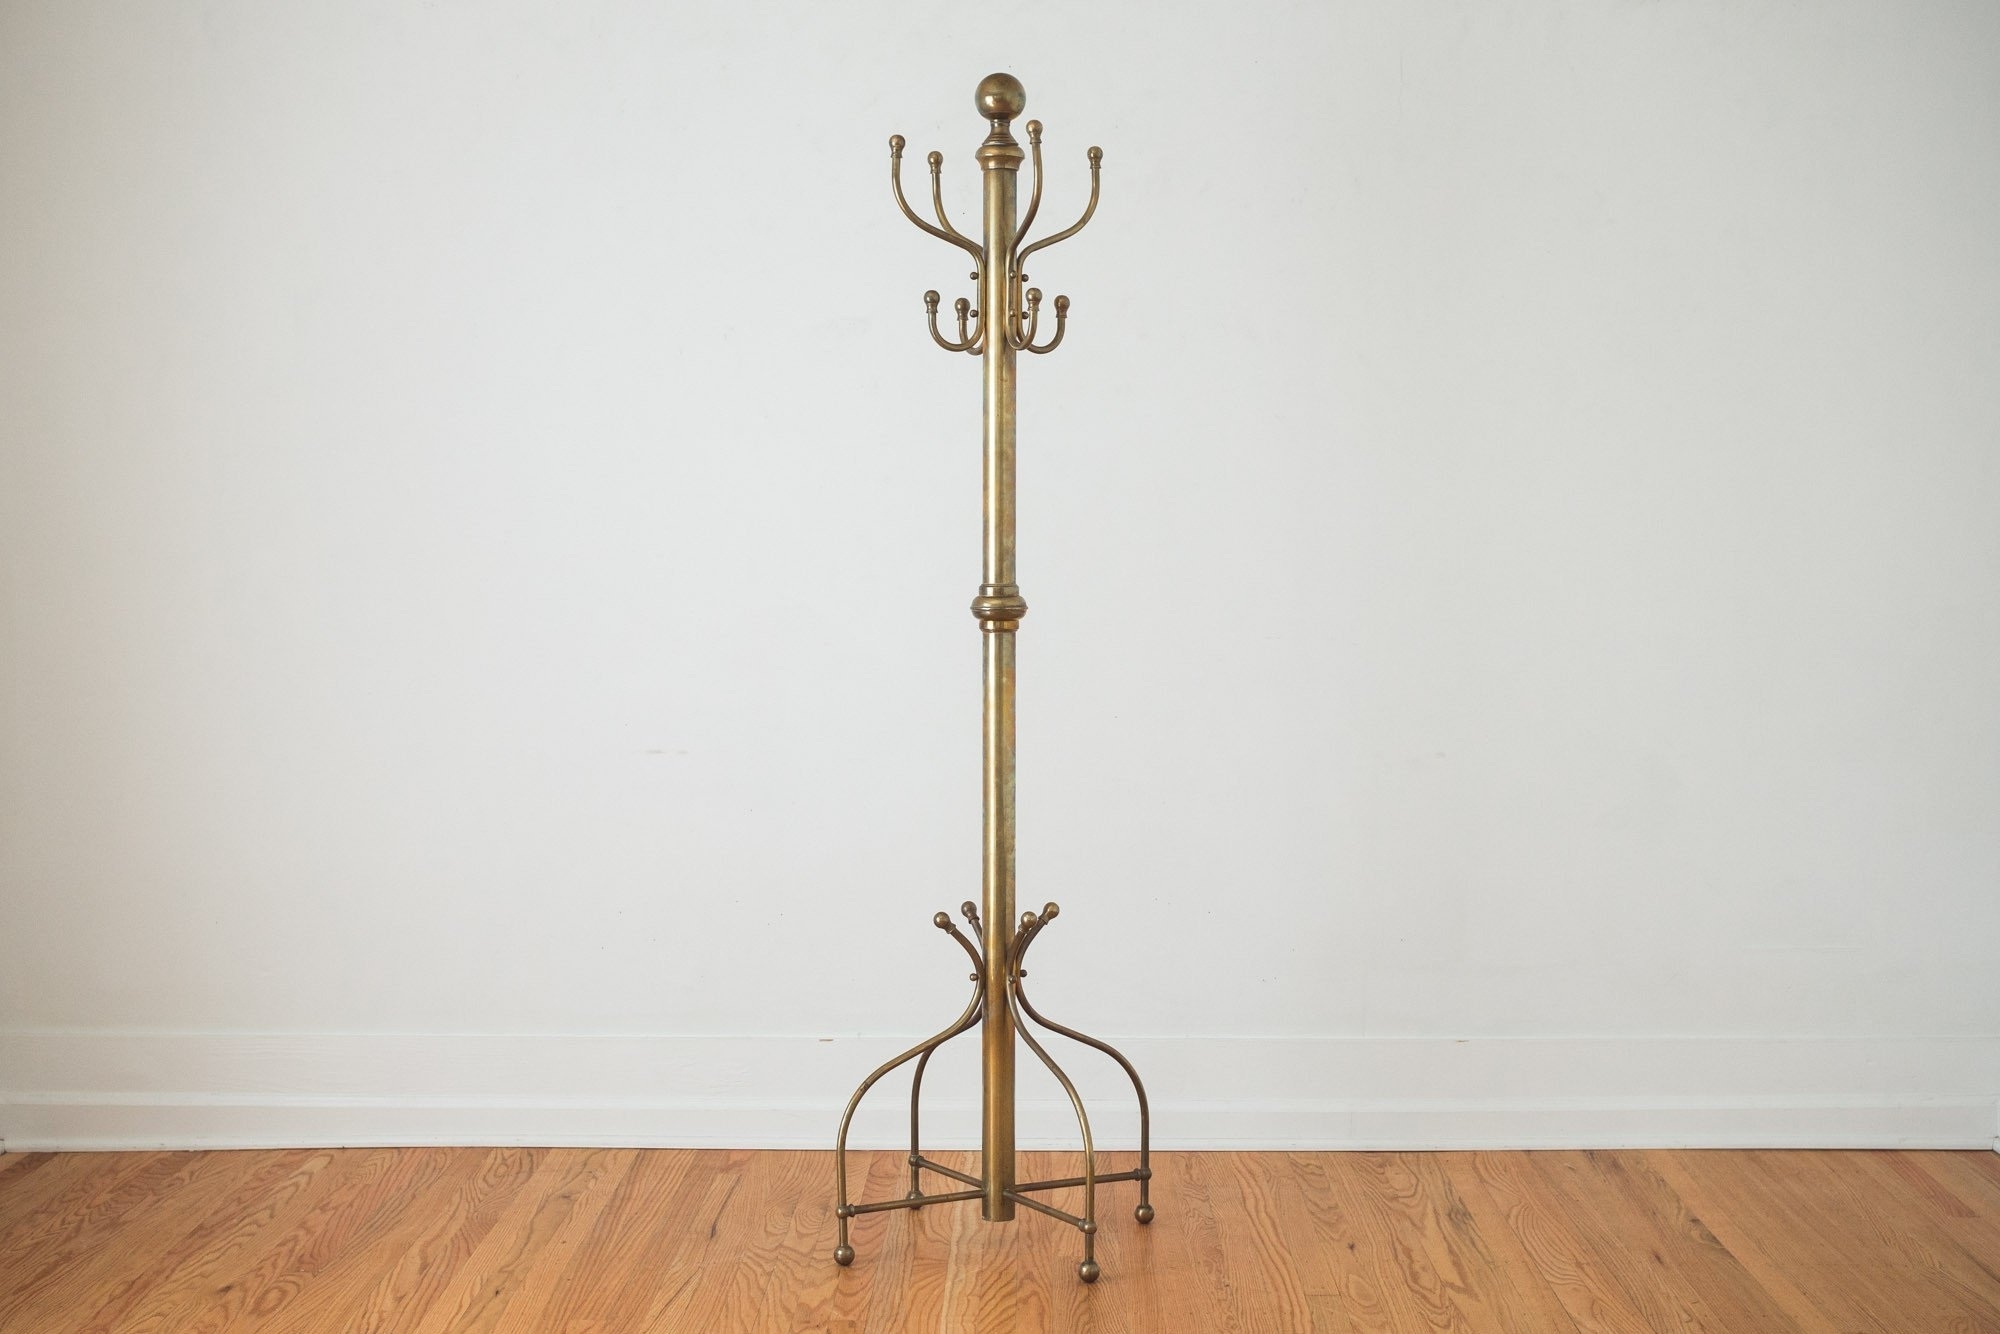 Vintage Brass and Copper Miniature Coat Rack Jewelry Tree